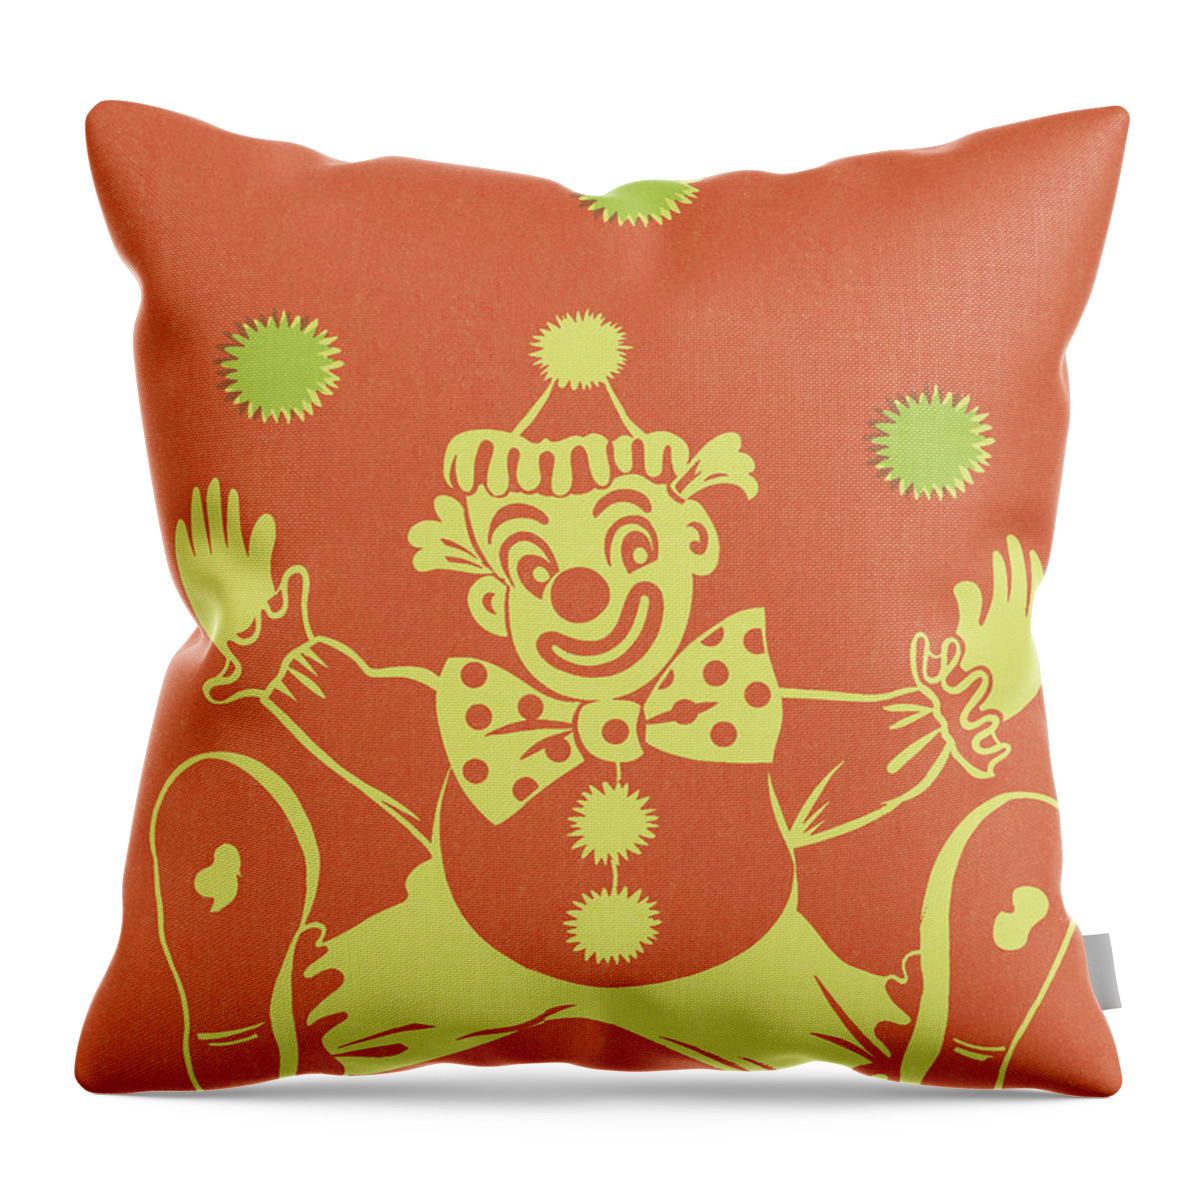 Campy Throw Pillow featuring the drawing Clown Juggling by CSA Images